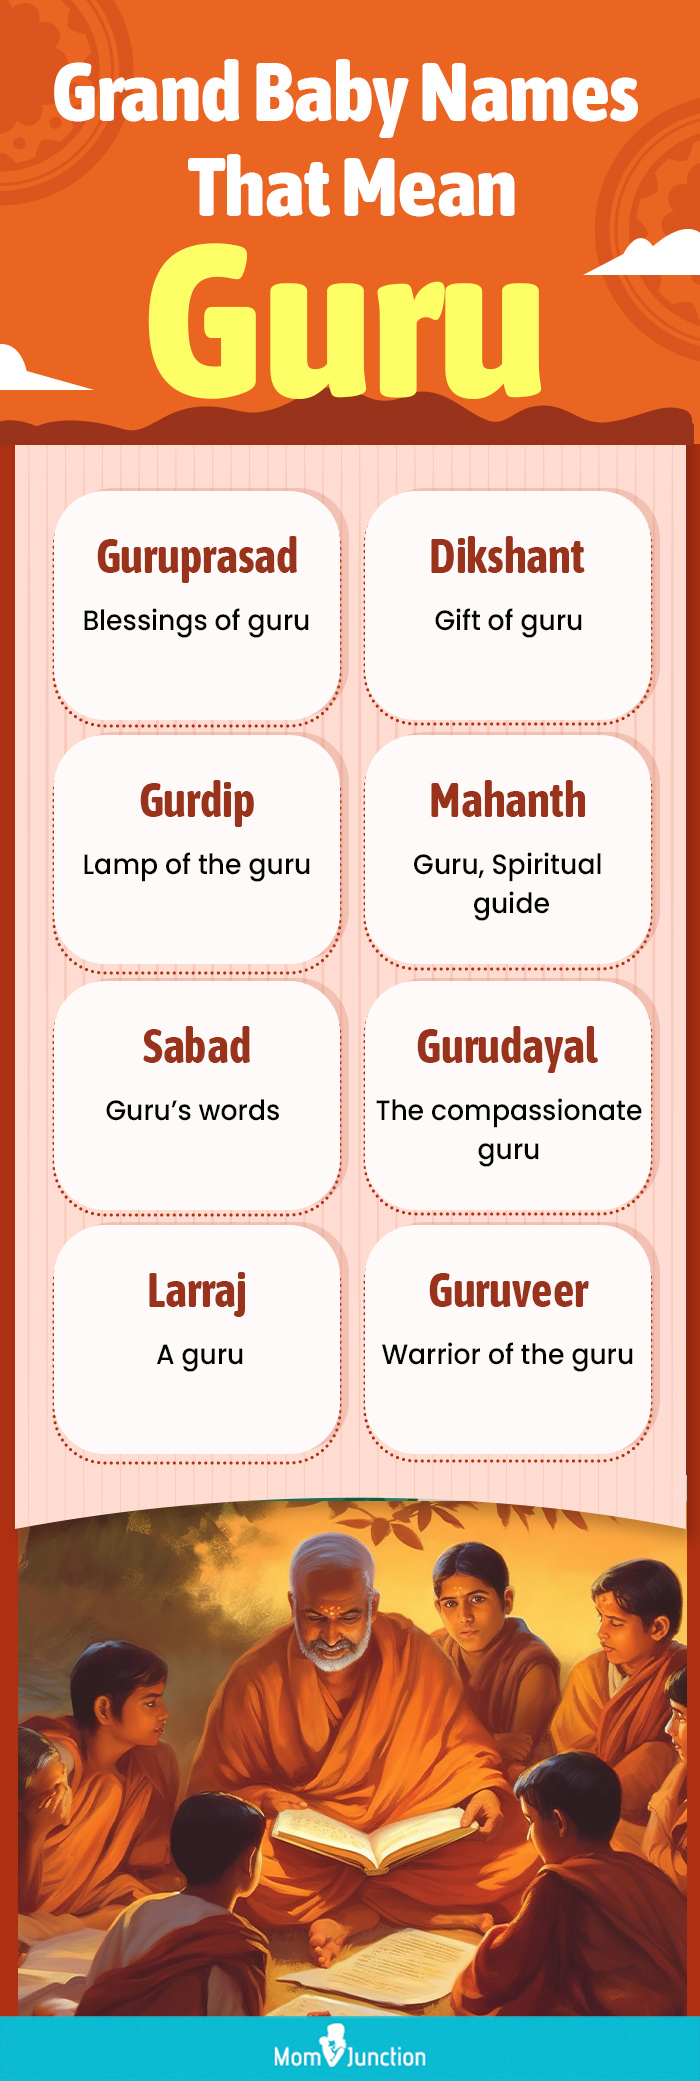 grand baby names that mean guru (infographic)